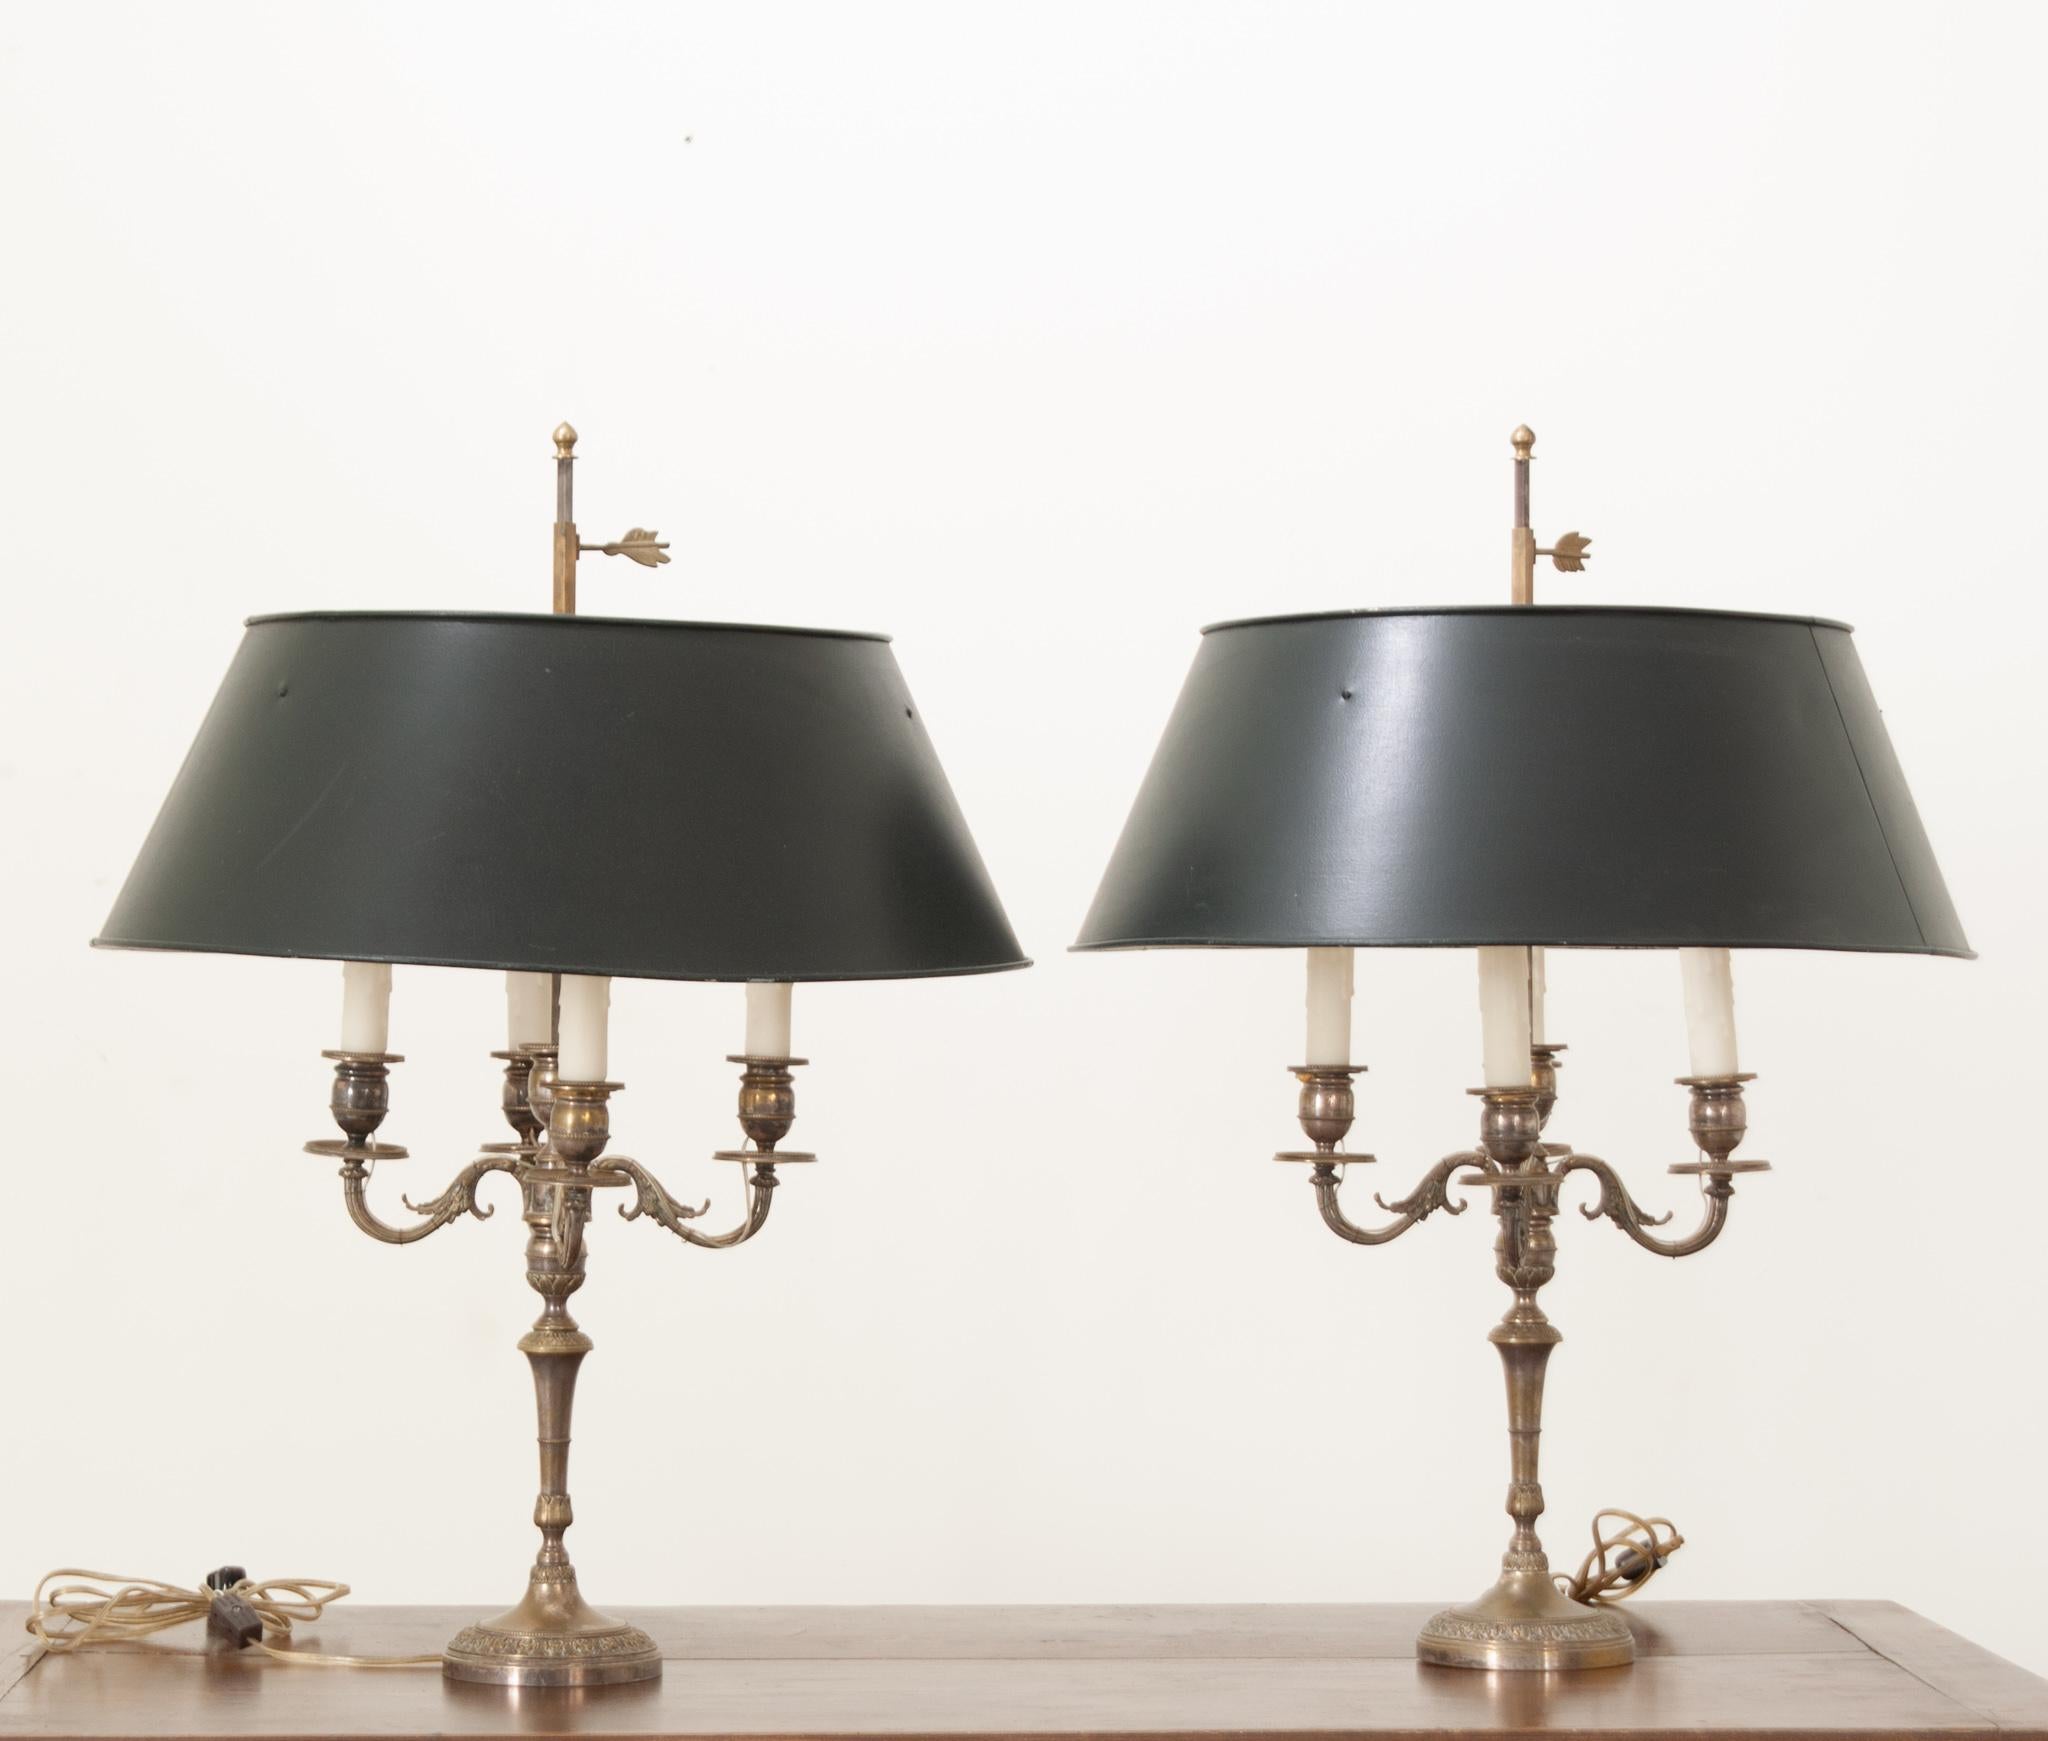 A pair of silver plated French candelabras made into bouillotte lamps with new black metal shades. Bouillotte is a card game that became popular in France during the 18th & 19th centuries. For light, they would use a bouillotte lamp. These silver